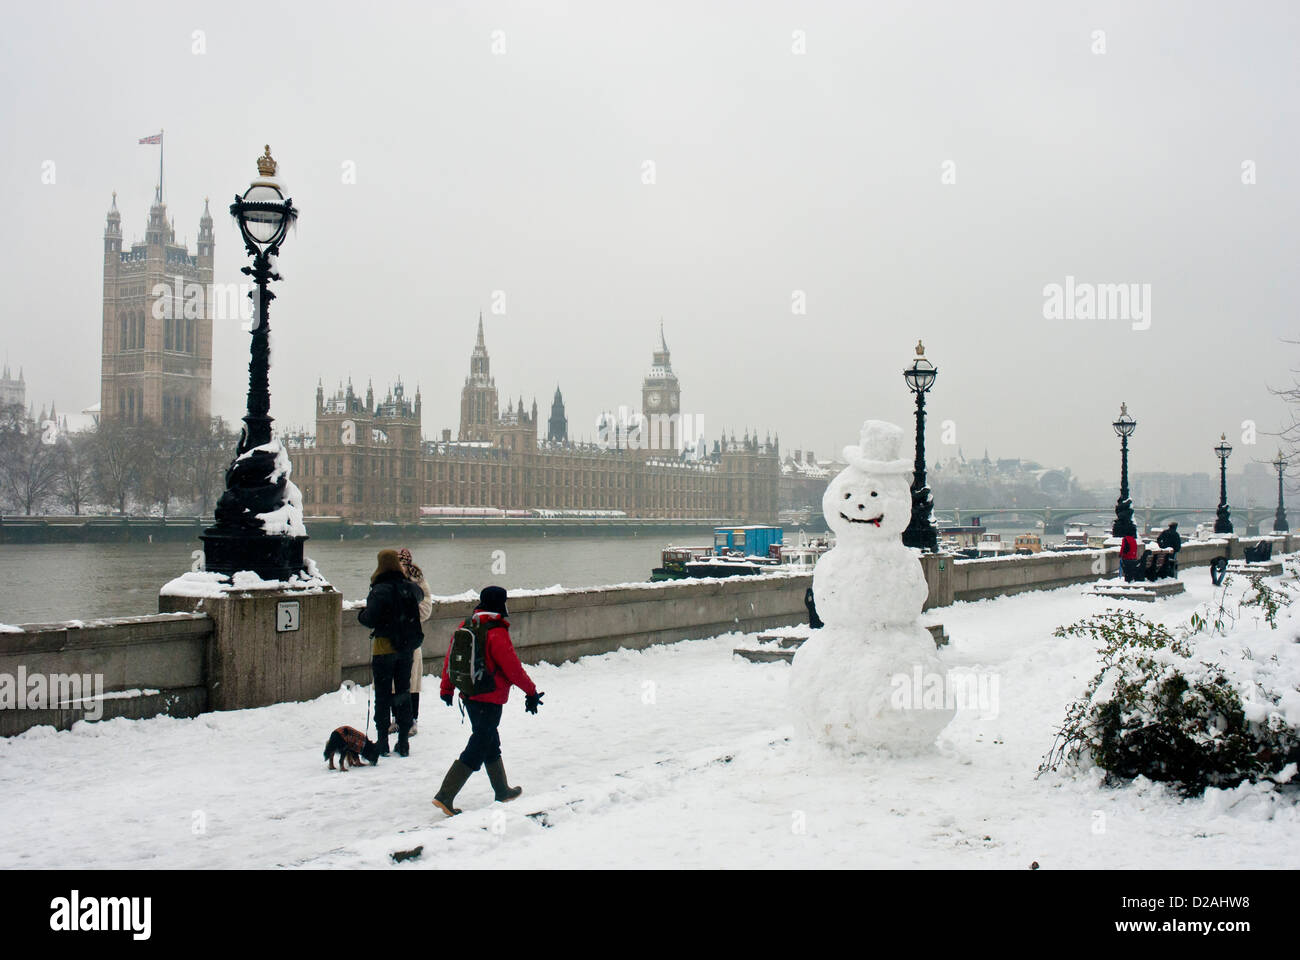 London, winter, with snow and snowman in the foreground and the Thames and Parliament. Stock Photo